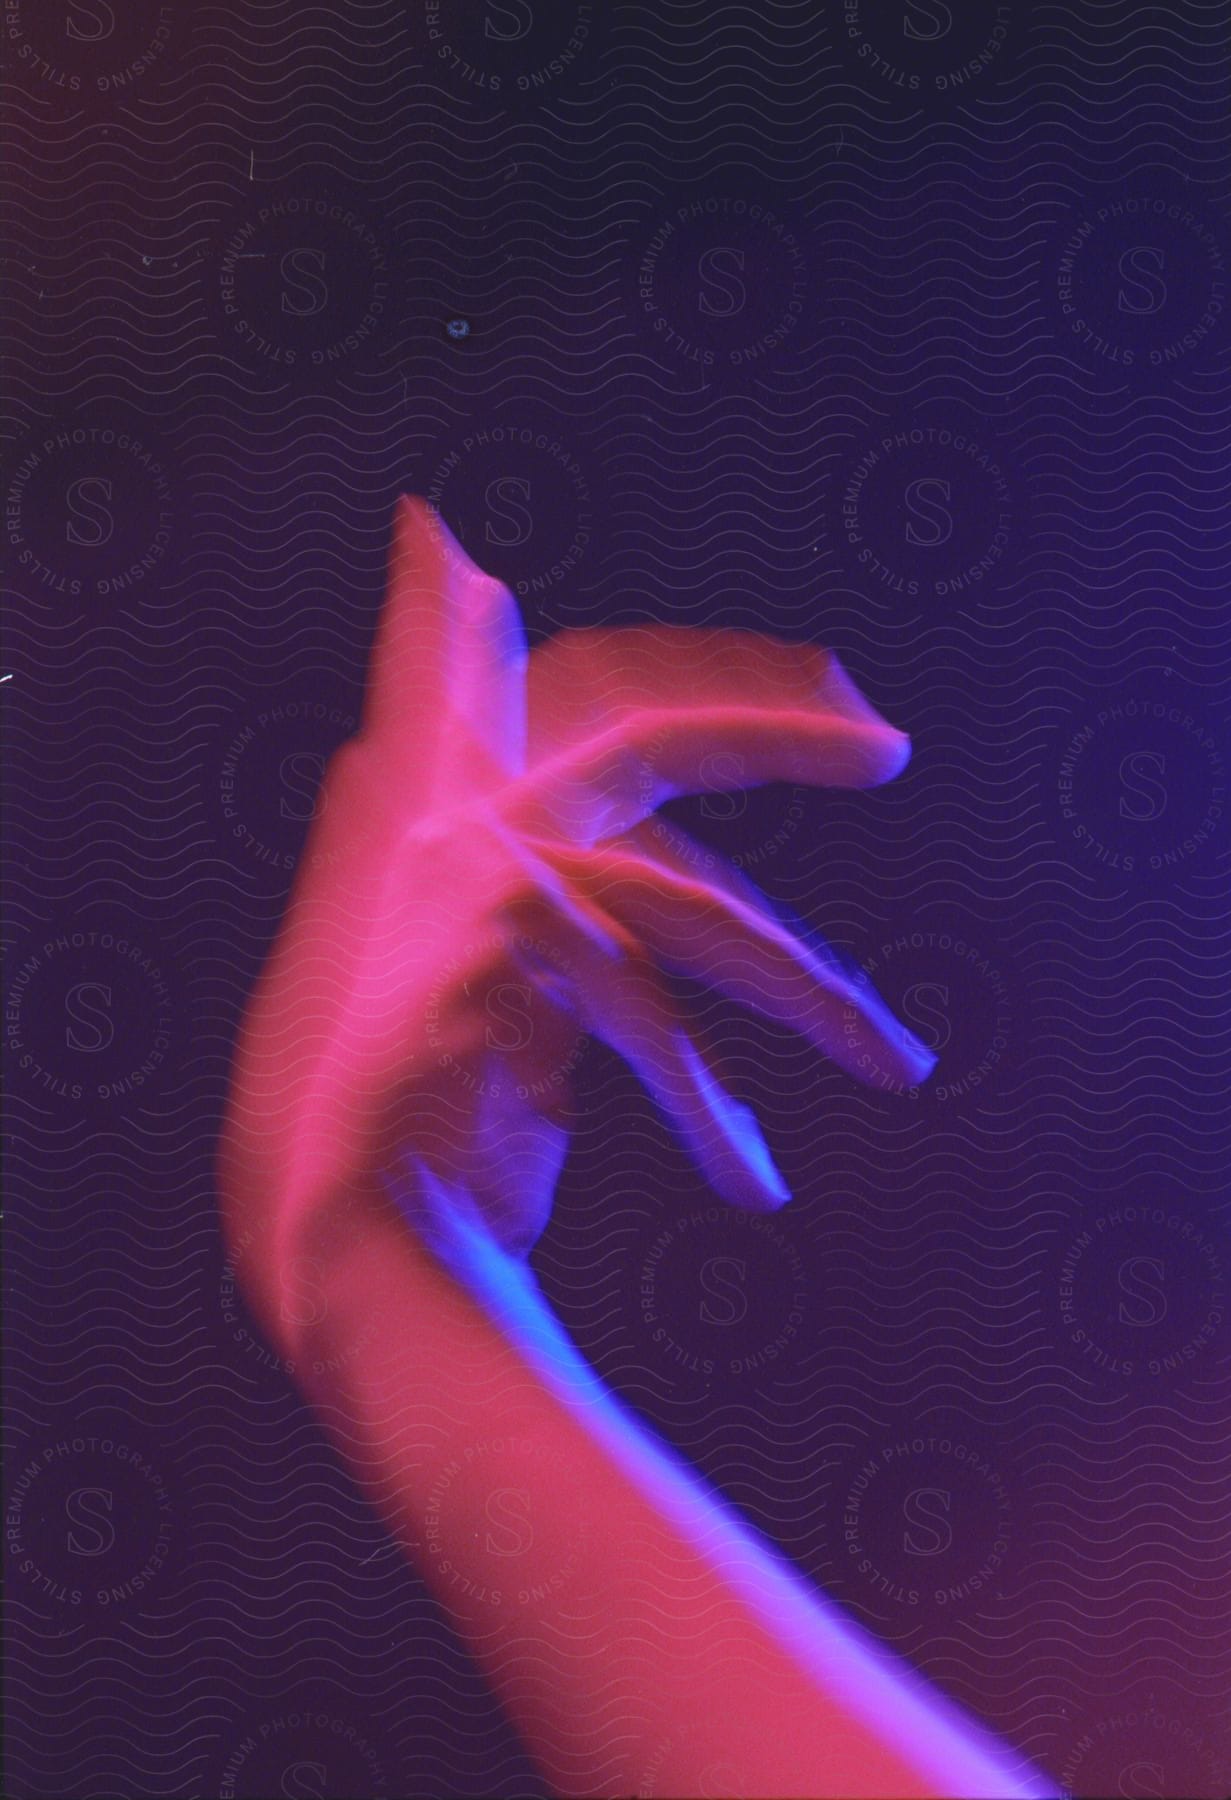 A persons hand making a gesture with purple lighting effects